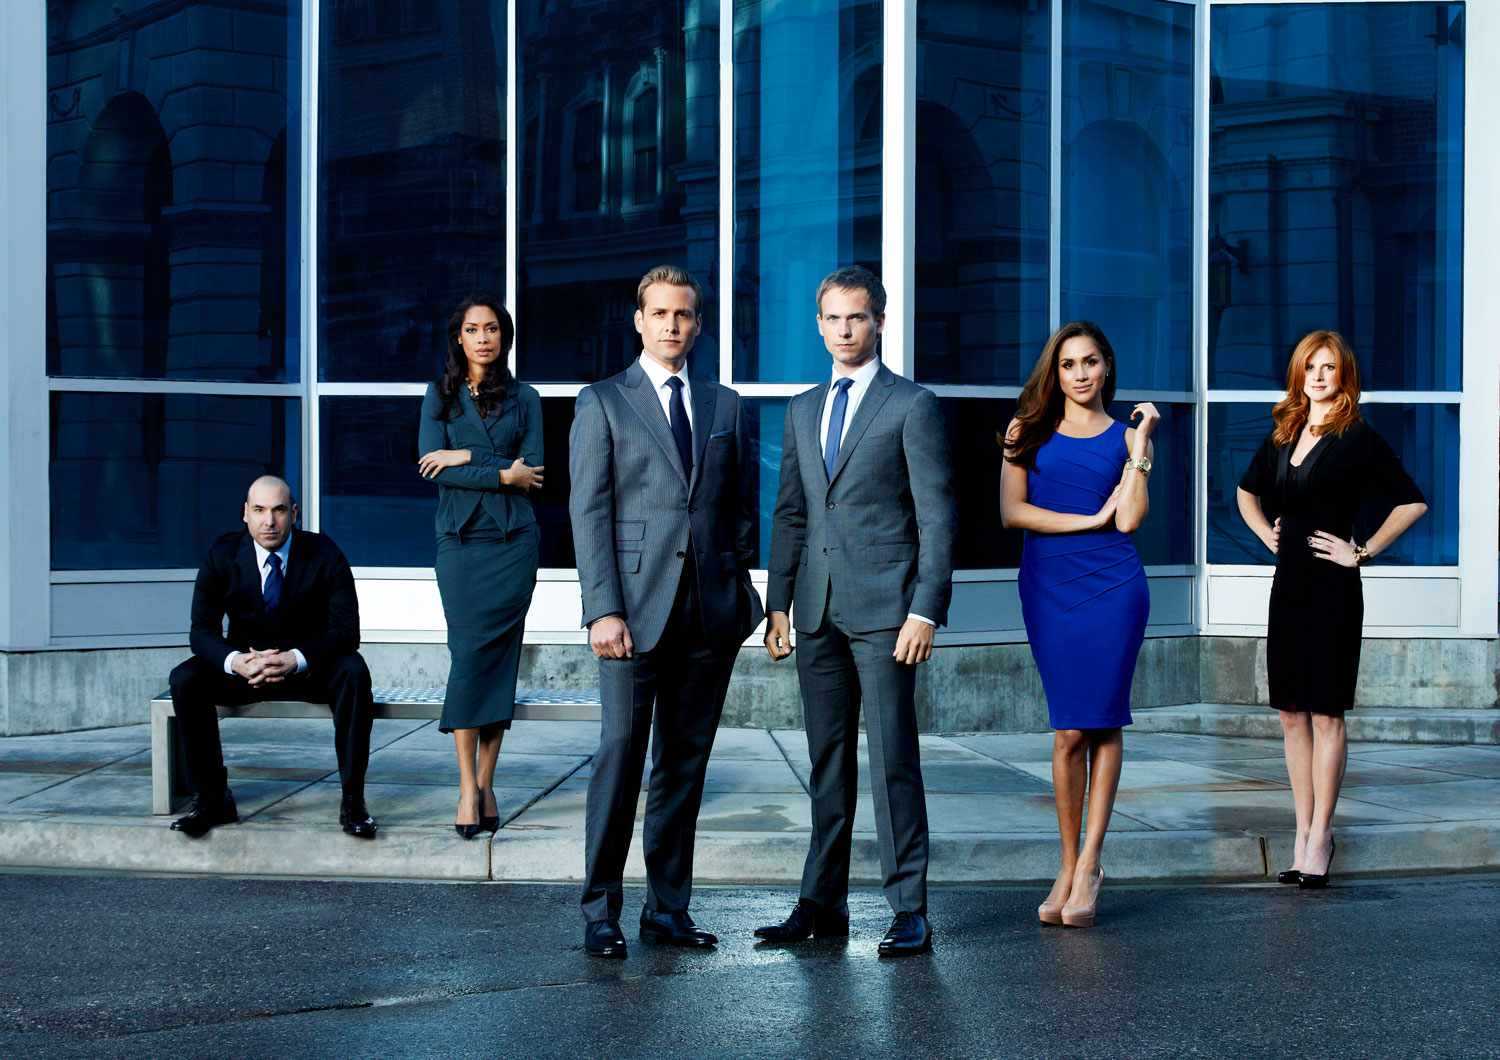 Suits LA: All you need to know about the Suits spinoff